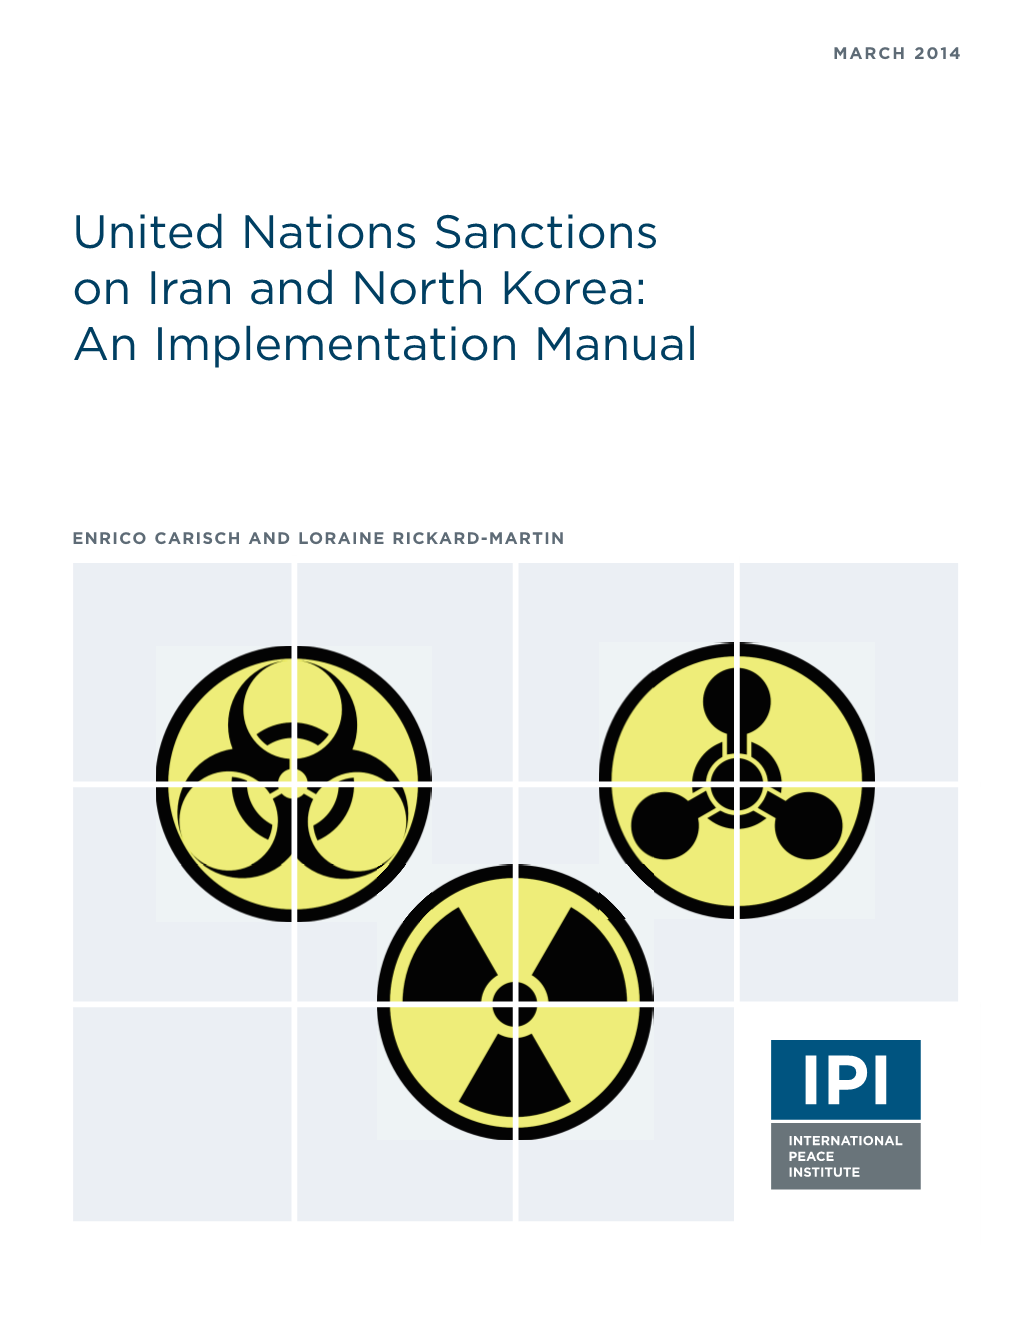 United Nations Sanctions on Iran and North Korea: an Implementation Manual